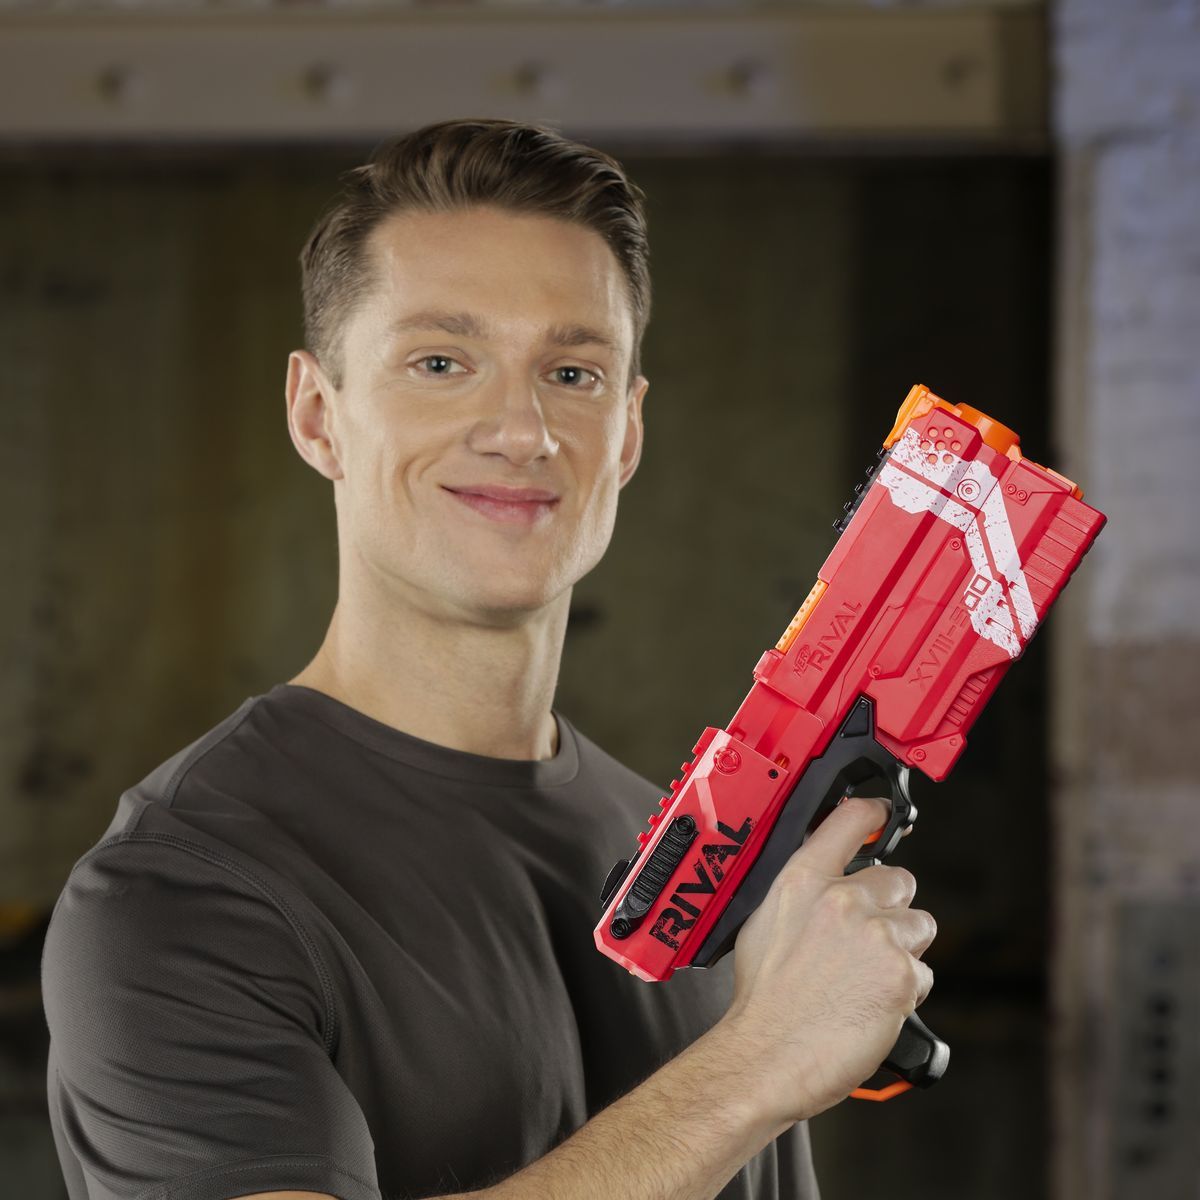   Nerf Rival 